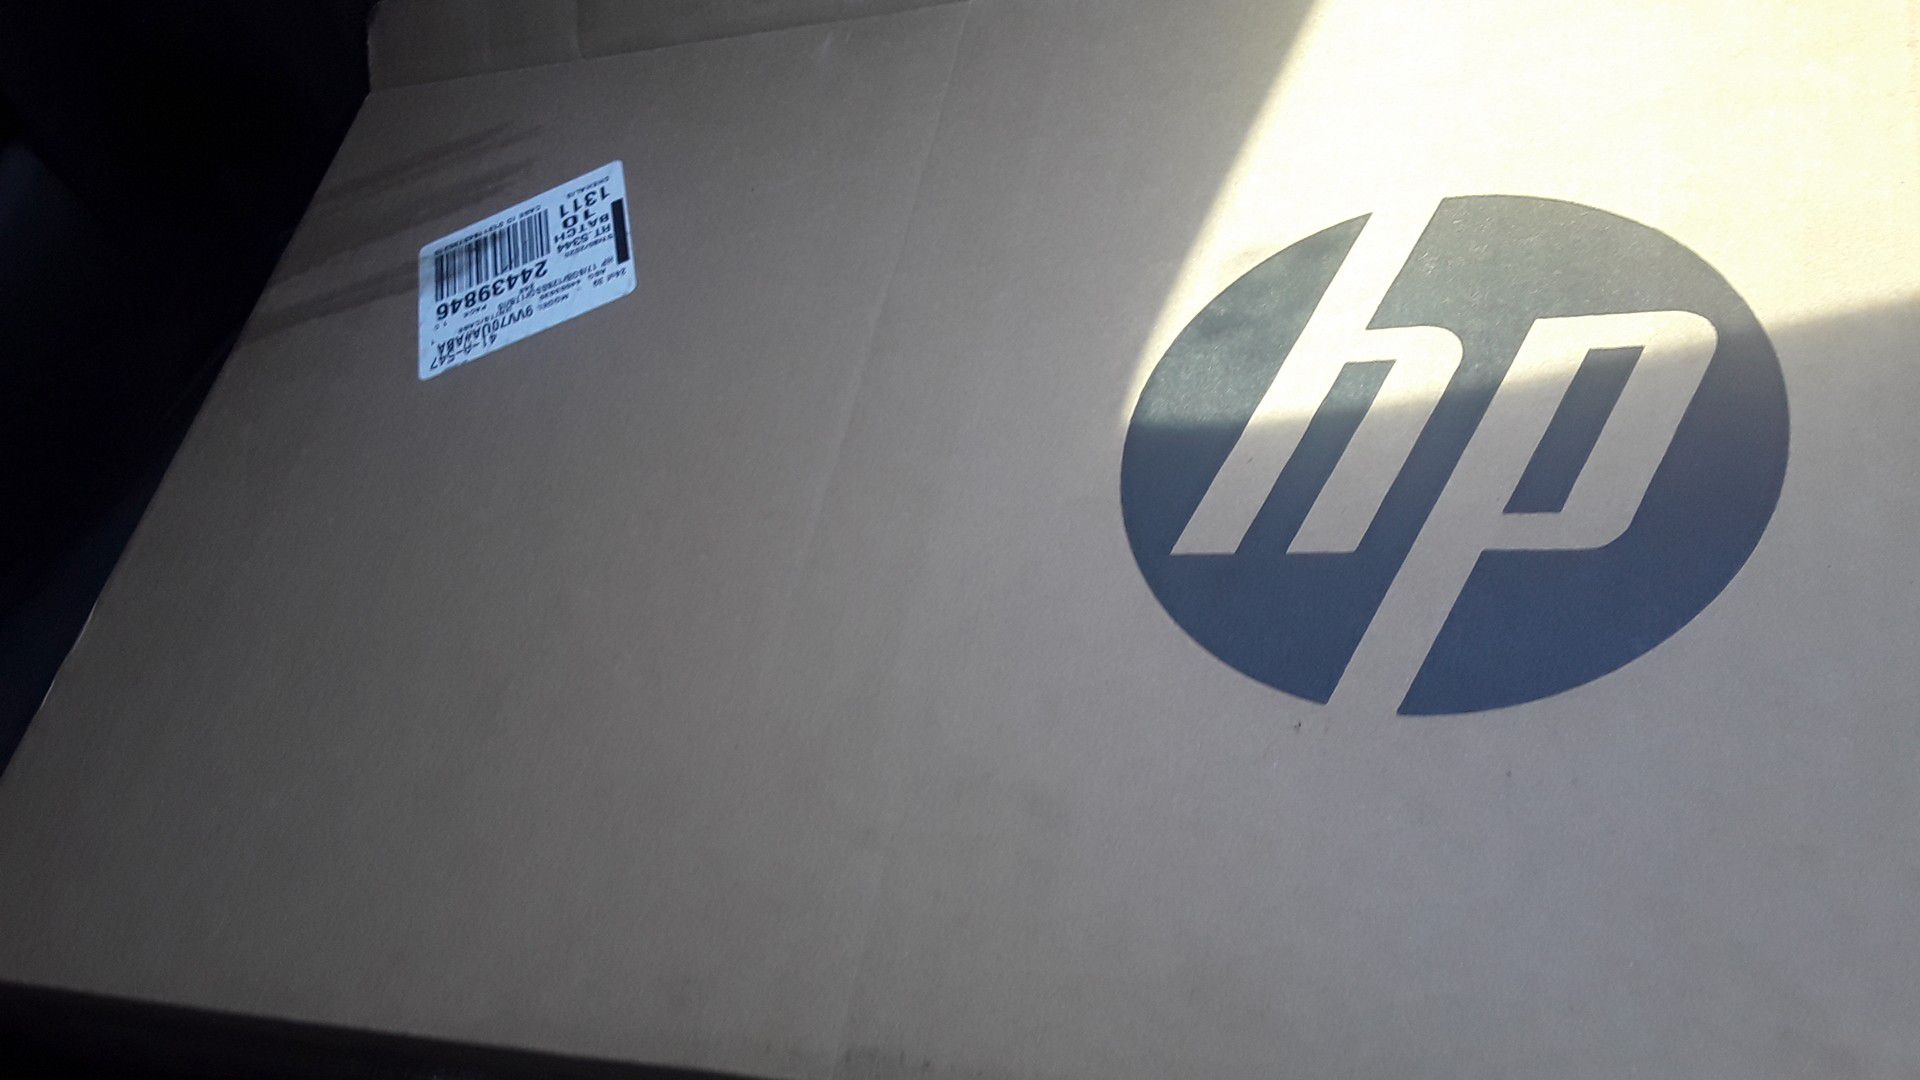 Brand new HP laptop in the box